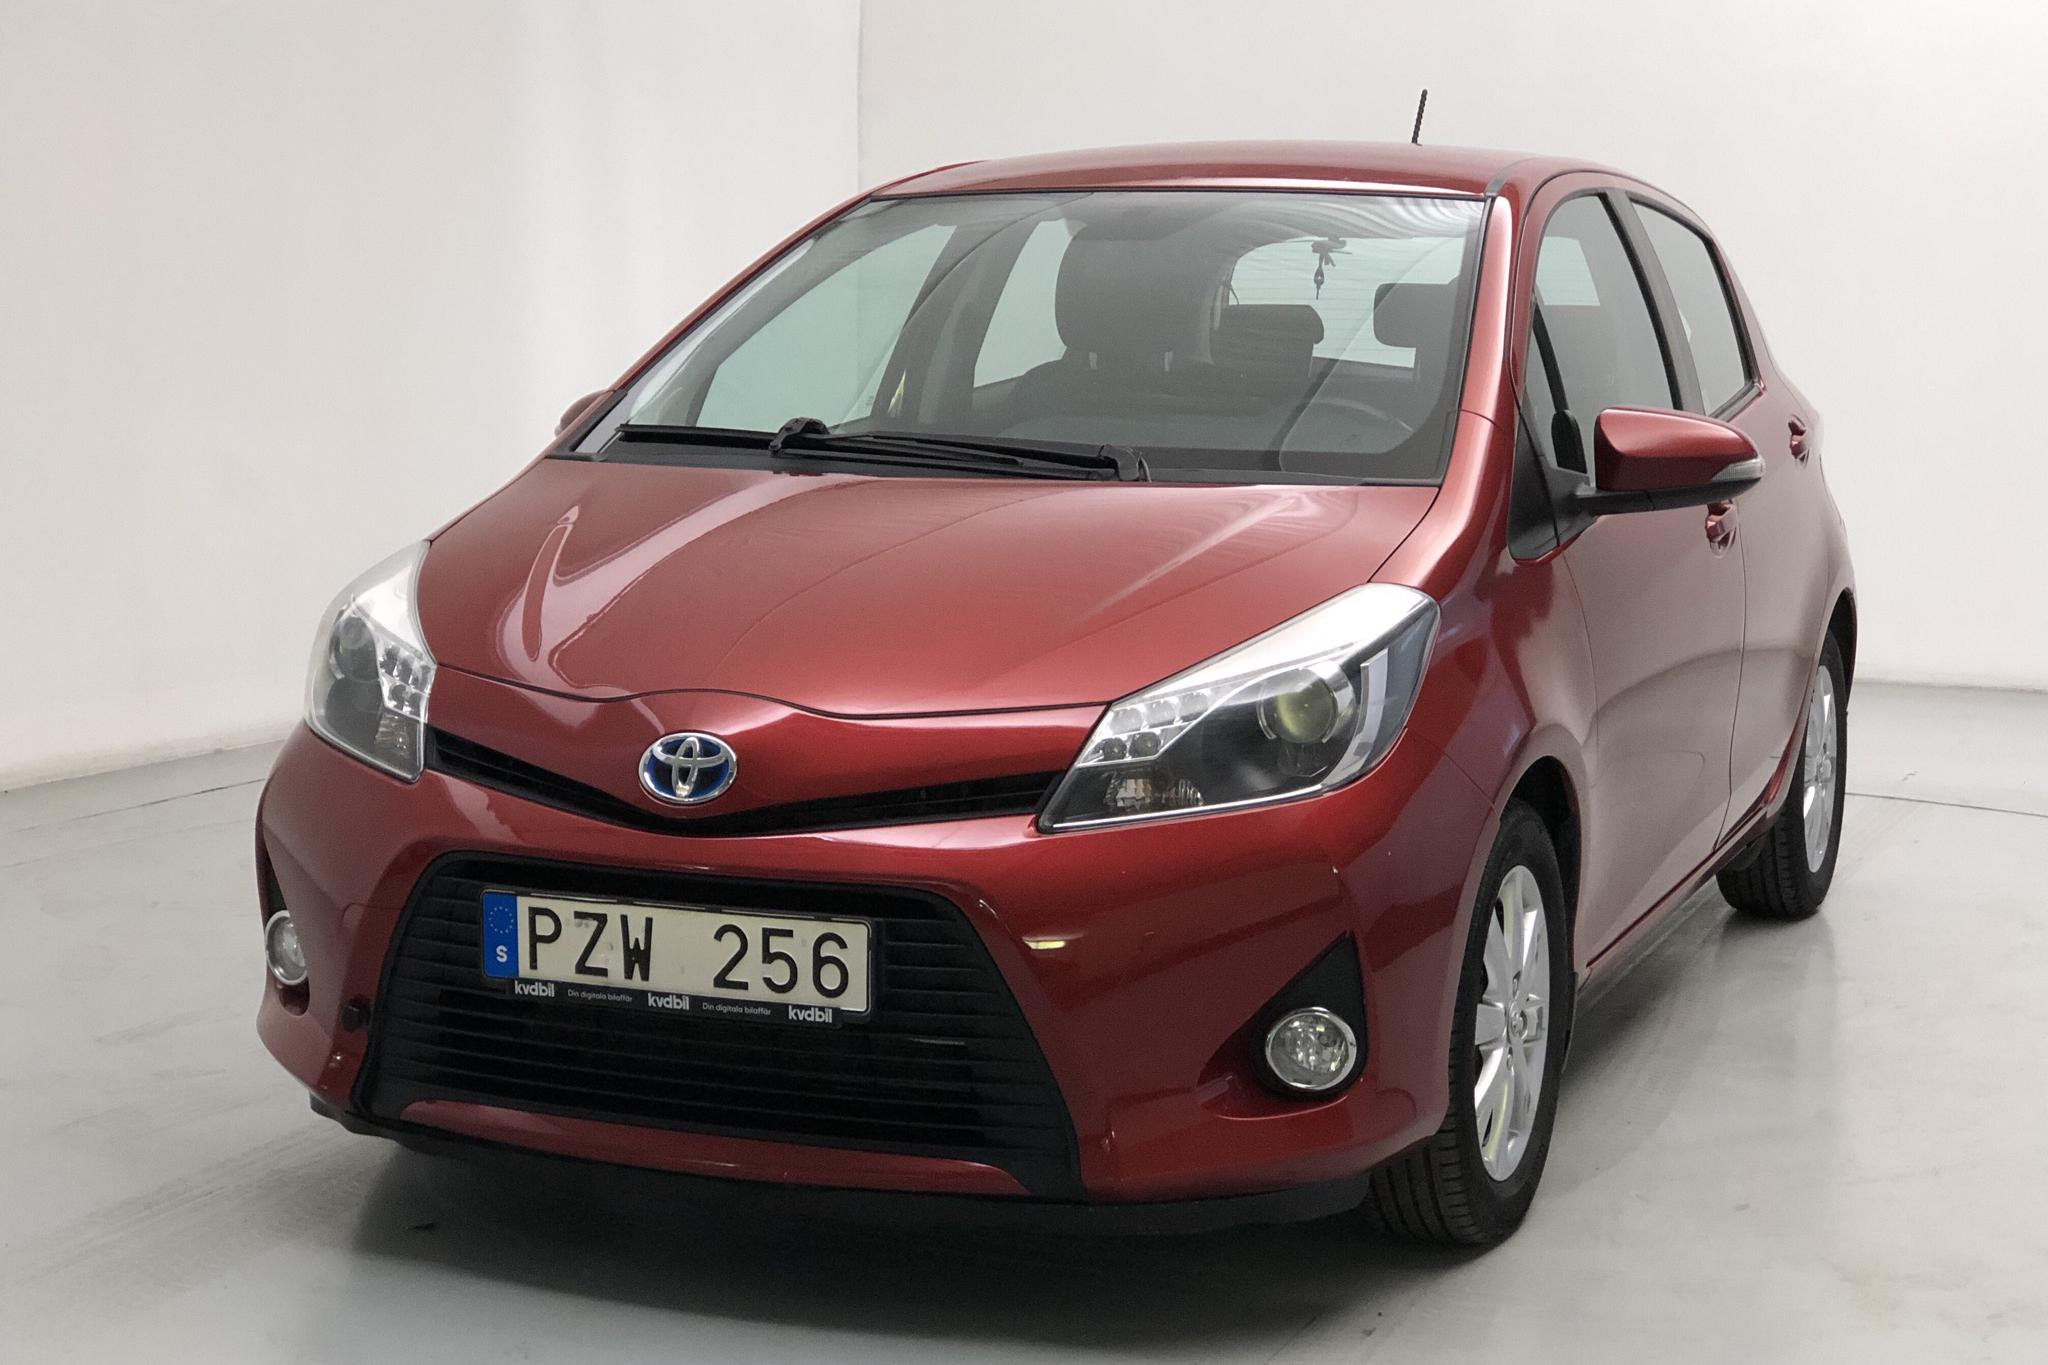 Toyota Yaris 1.5 HSD 5dr (75hk) - 148 250 km - Automatic - red - 2013